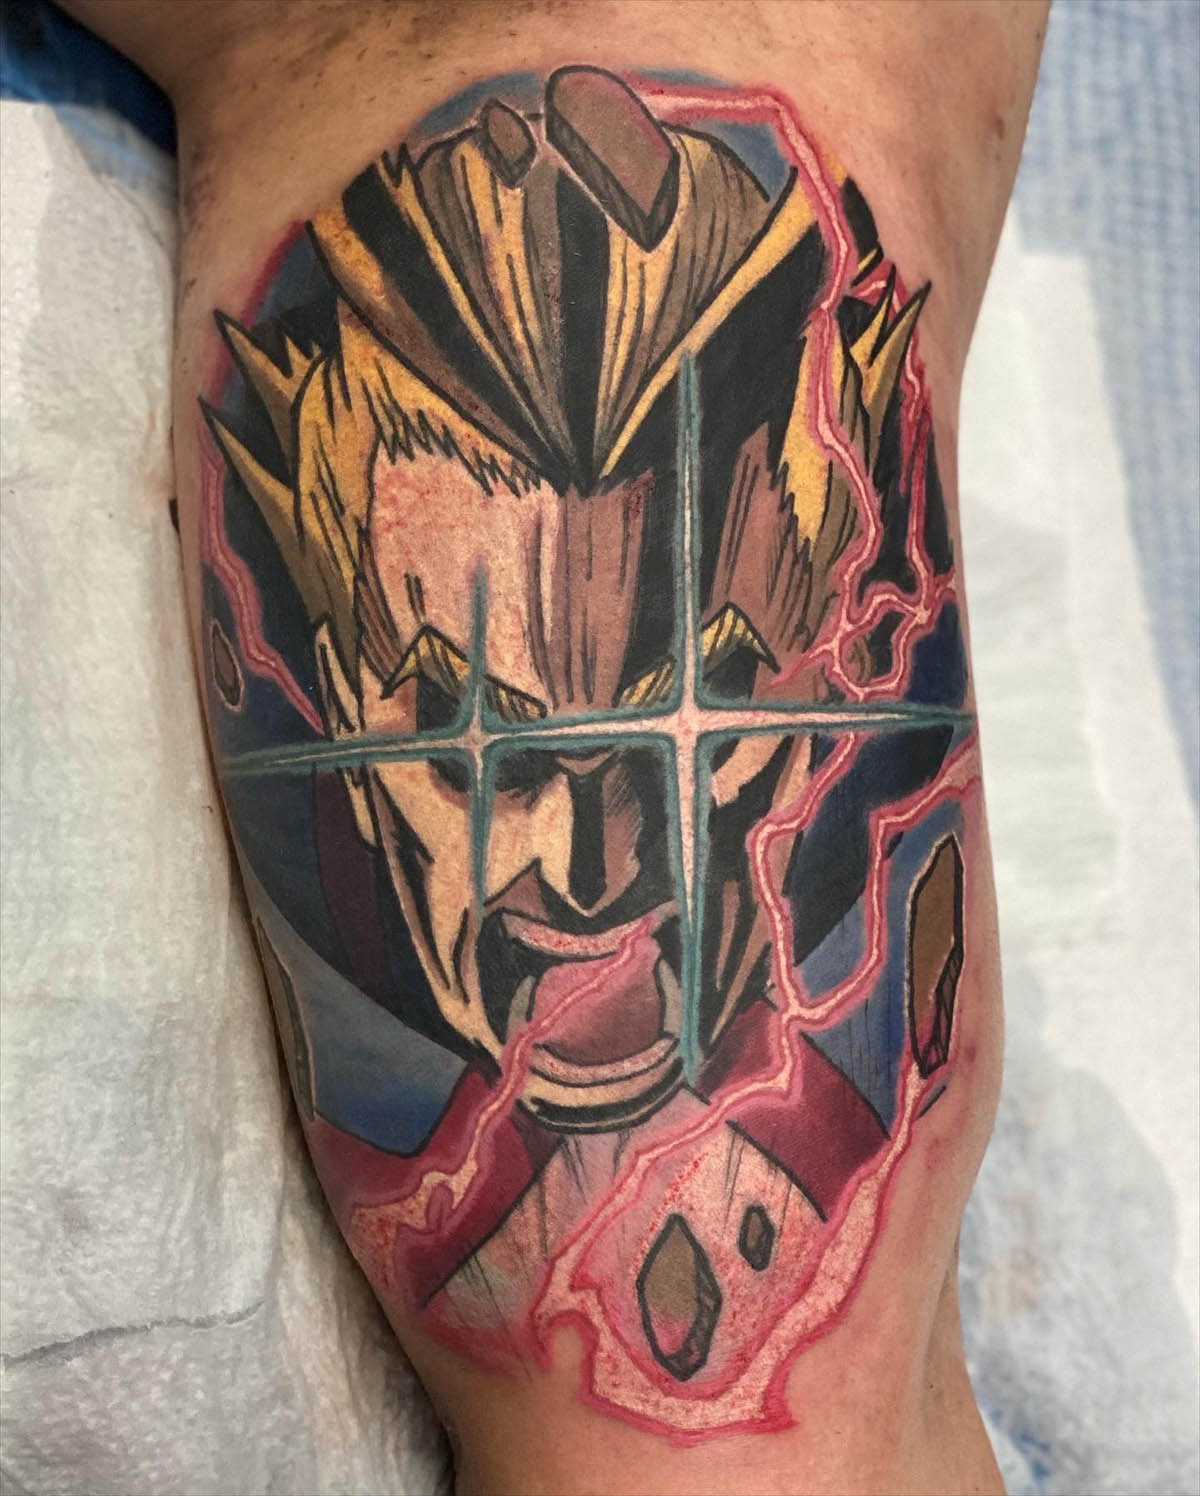 Plussss Ultraaaa 💪 Smashhhhh 🌋 Excellent Tattoo of All Might is so  cool.😍 One For All 👆 Anime Boku no hero 😊 Artist Credit @rizztattoo 🎩…  | Tatuaggi